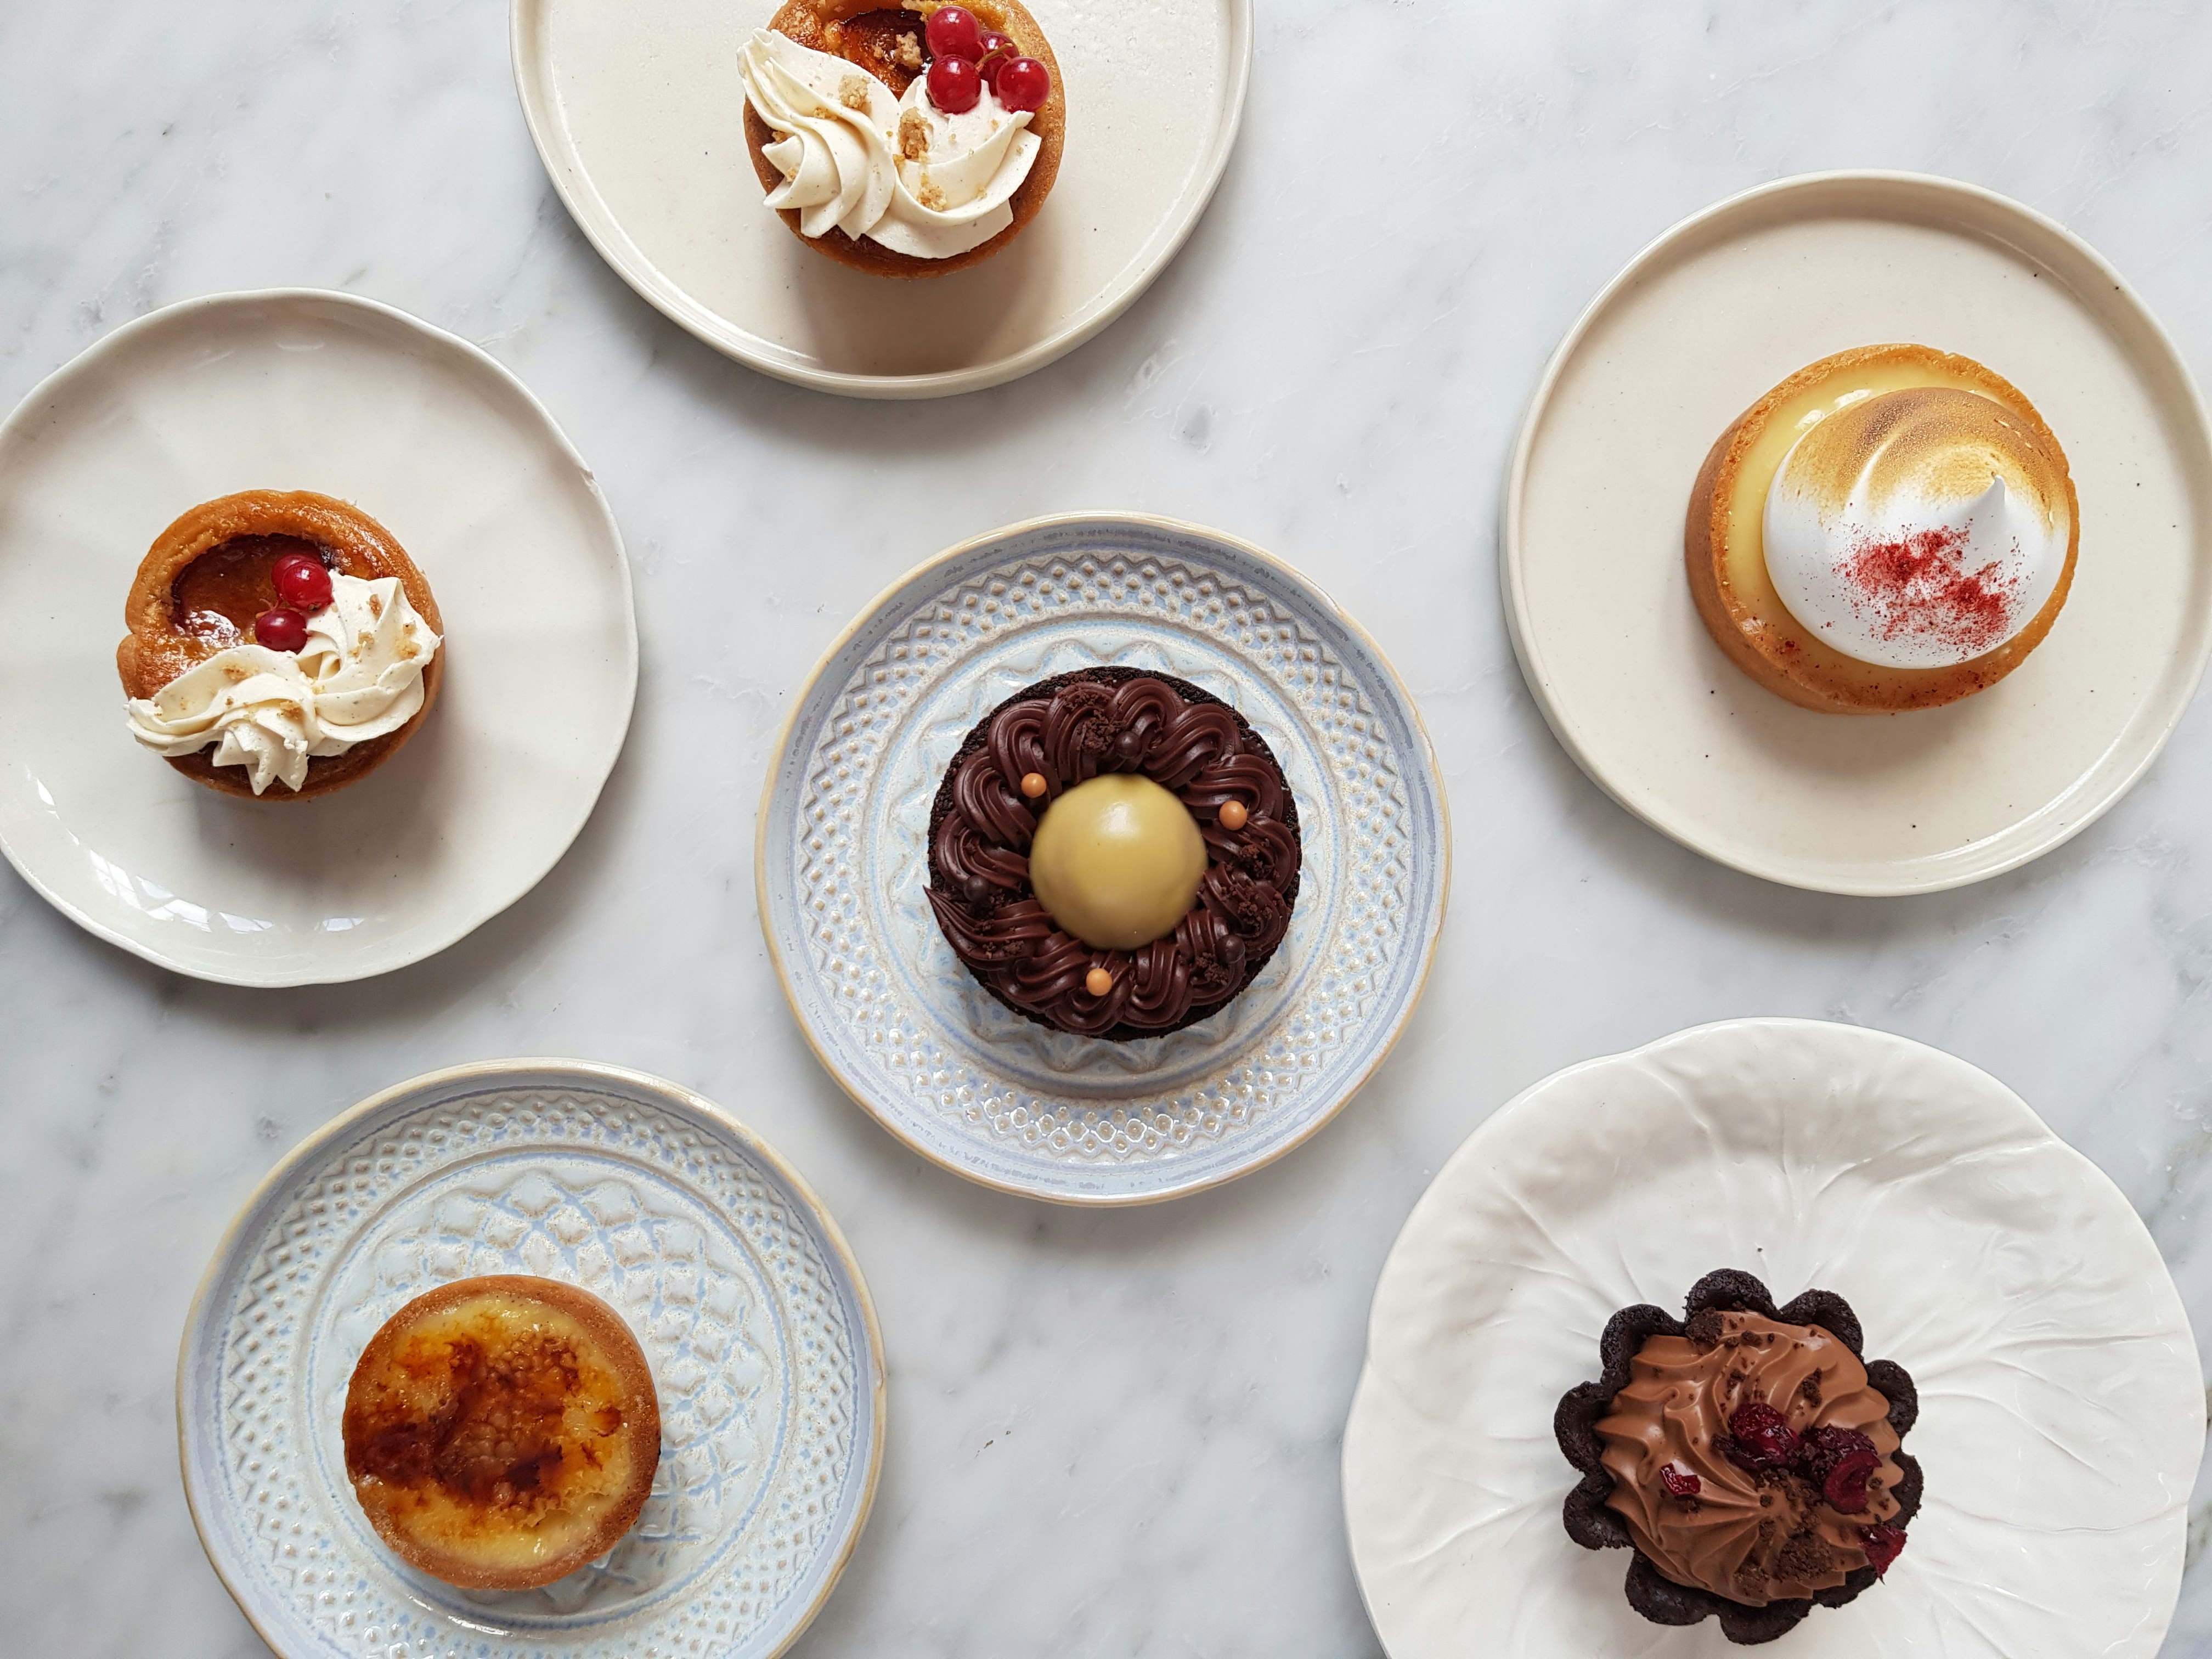 Assorted colourful pastries displayed on white plates set on a white marble surface at Lily Vanilli in east London.